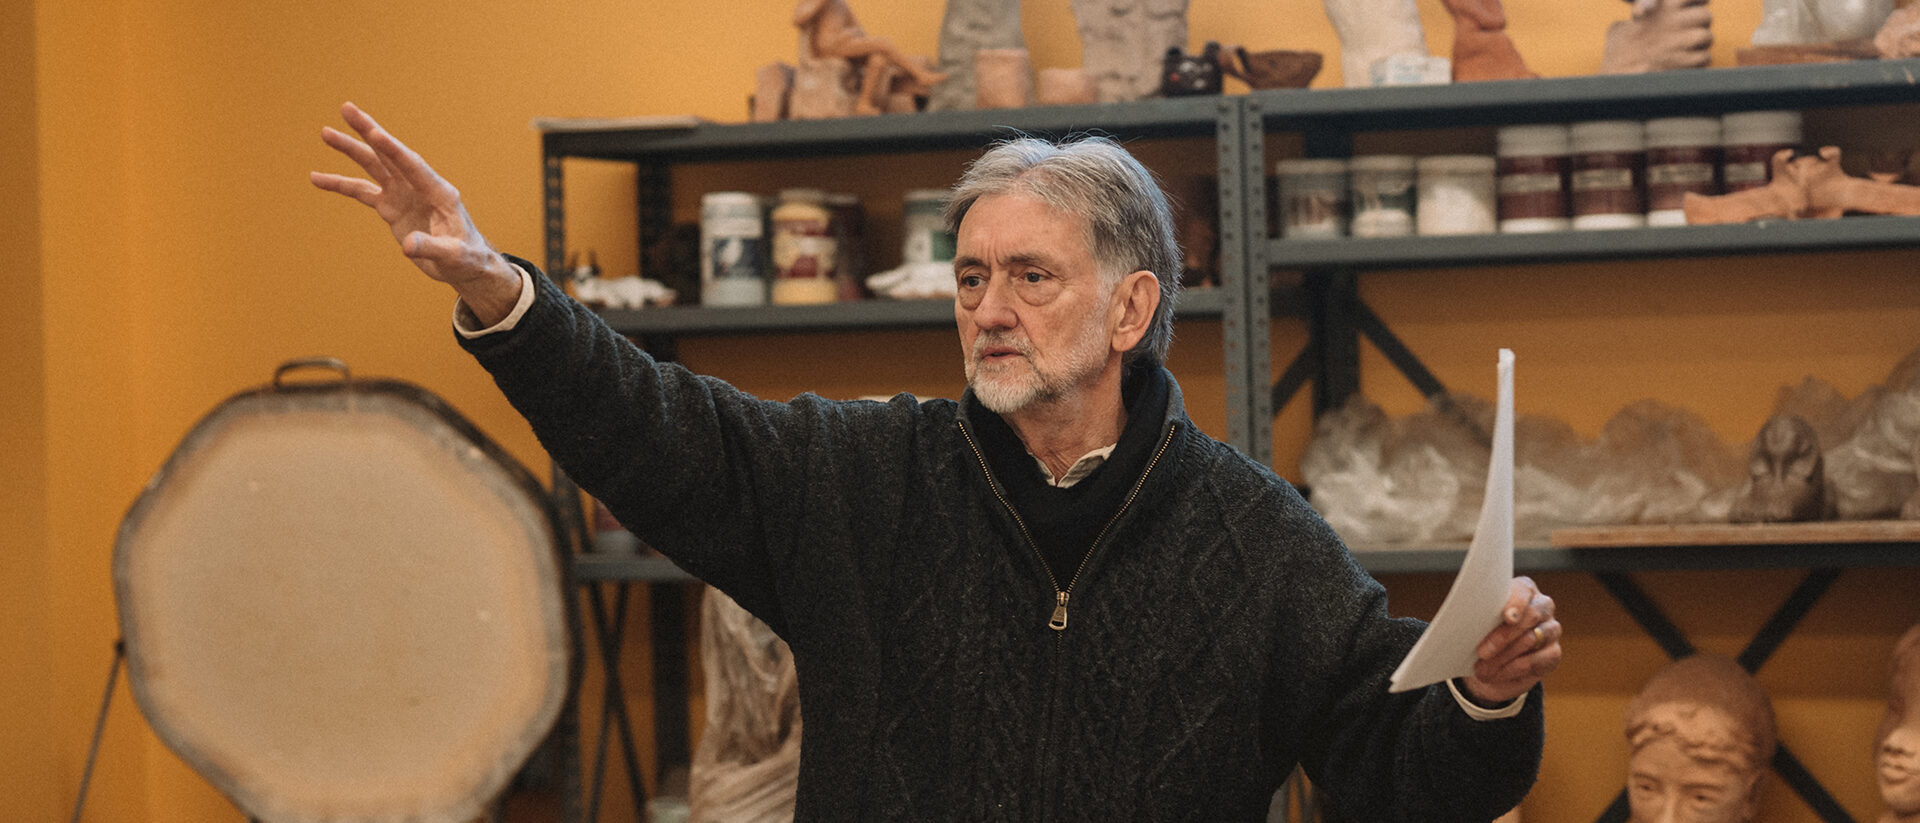 Alkion instructor Patrick Stolfo teaching clay sculpture class while standing in front of shelves displaying a variety of clay works in progress